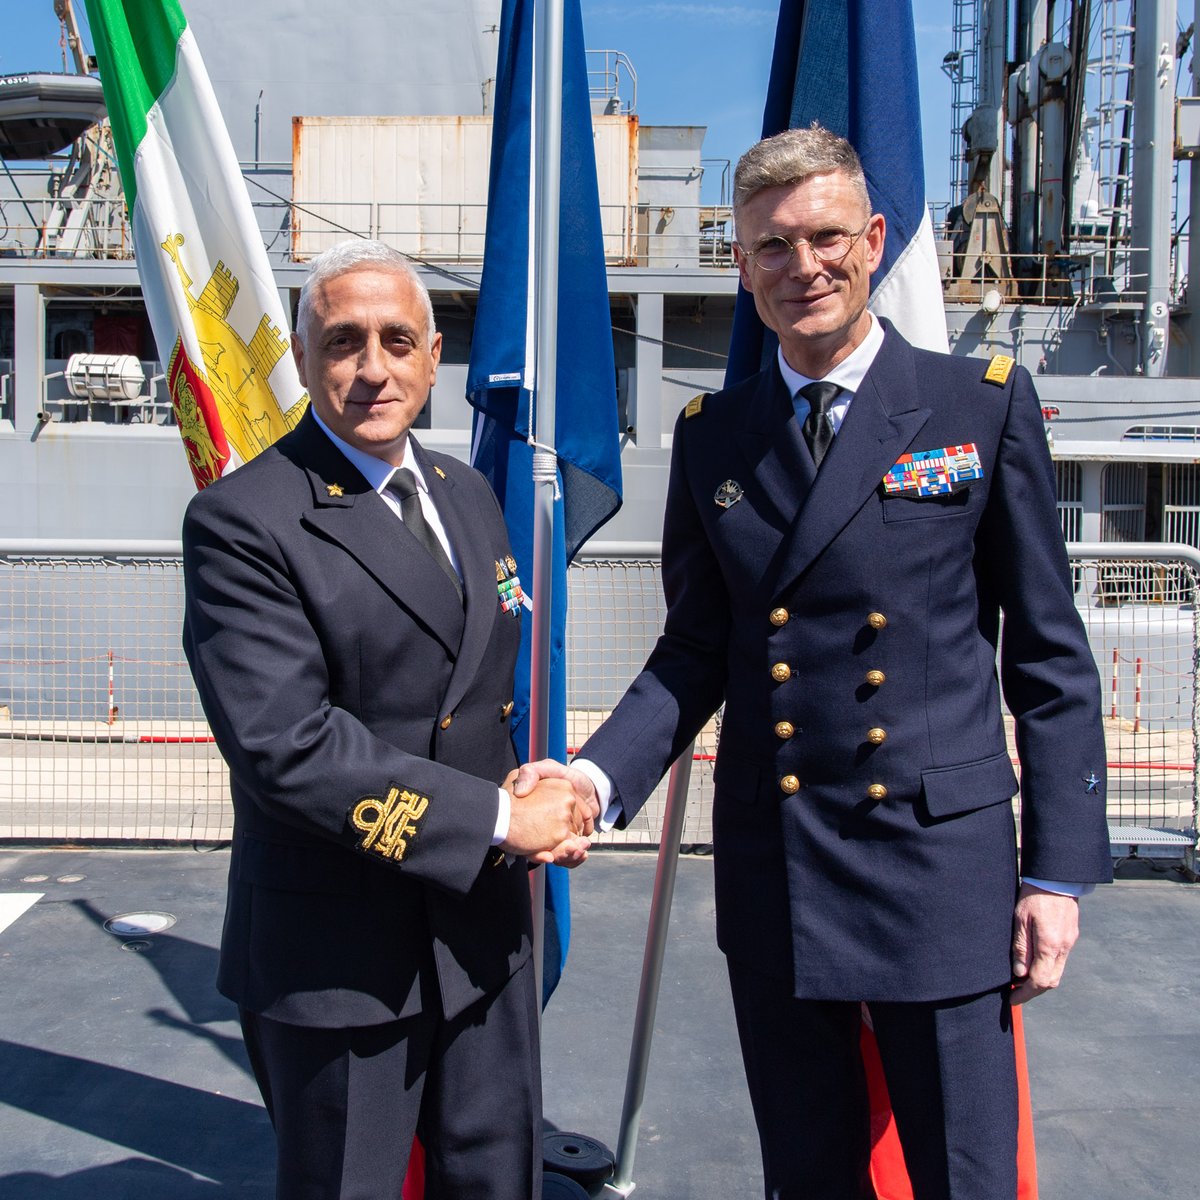 Today, (italian flag) Rear Admiral Esposito has formally handed over command of Standing NATO Maritime Group to (french flag) Rear Admiral Bossu. We carry on the mission ! #StrongerTogether #WeAreNATO @ItalianNavy @MarineNationale